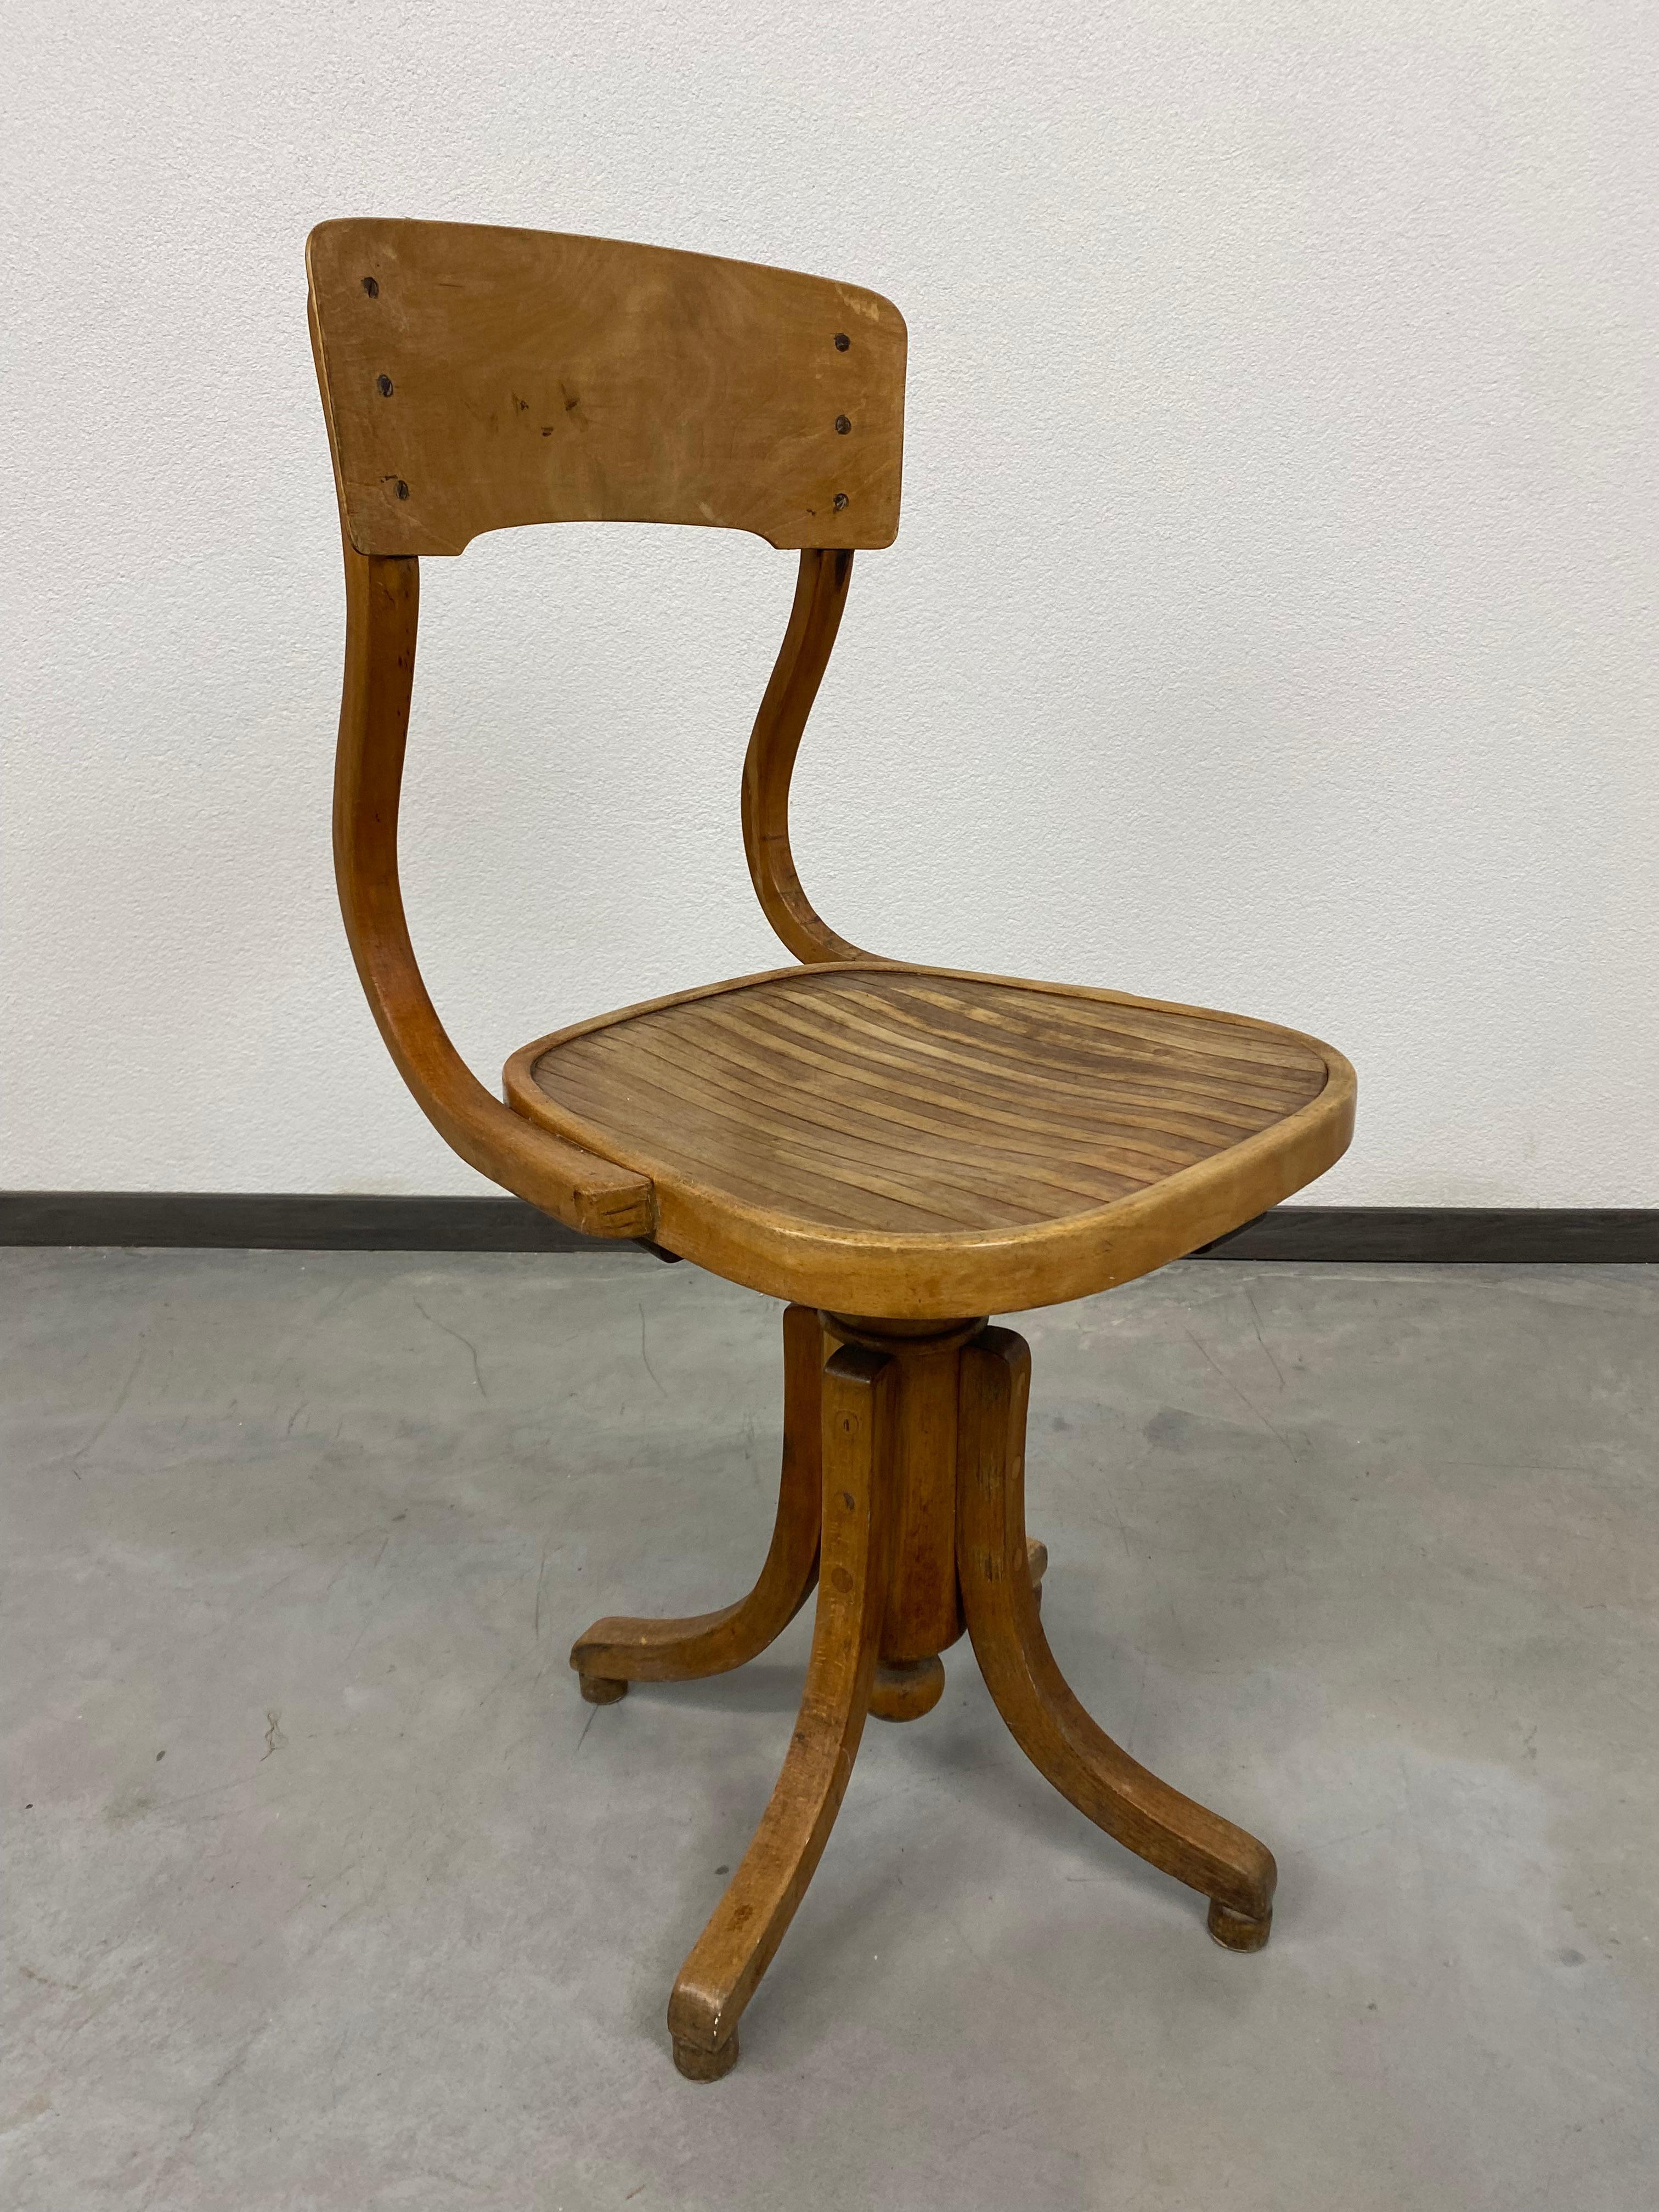 Jerry swivel desk chair in oriignal condition with signs of use.